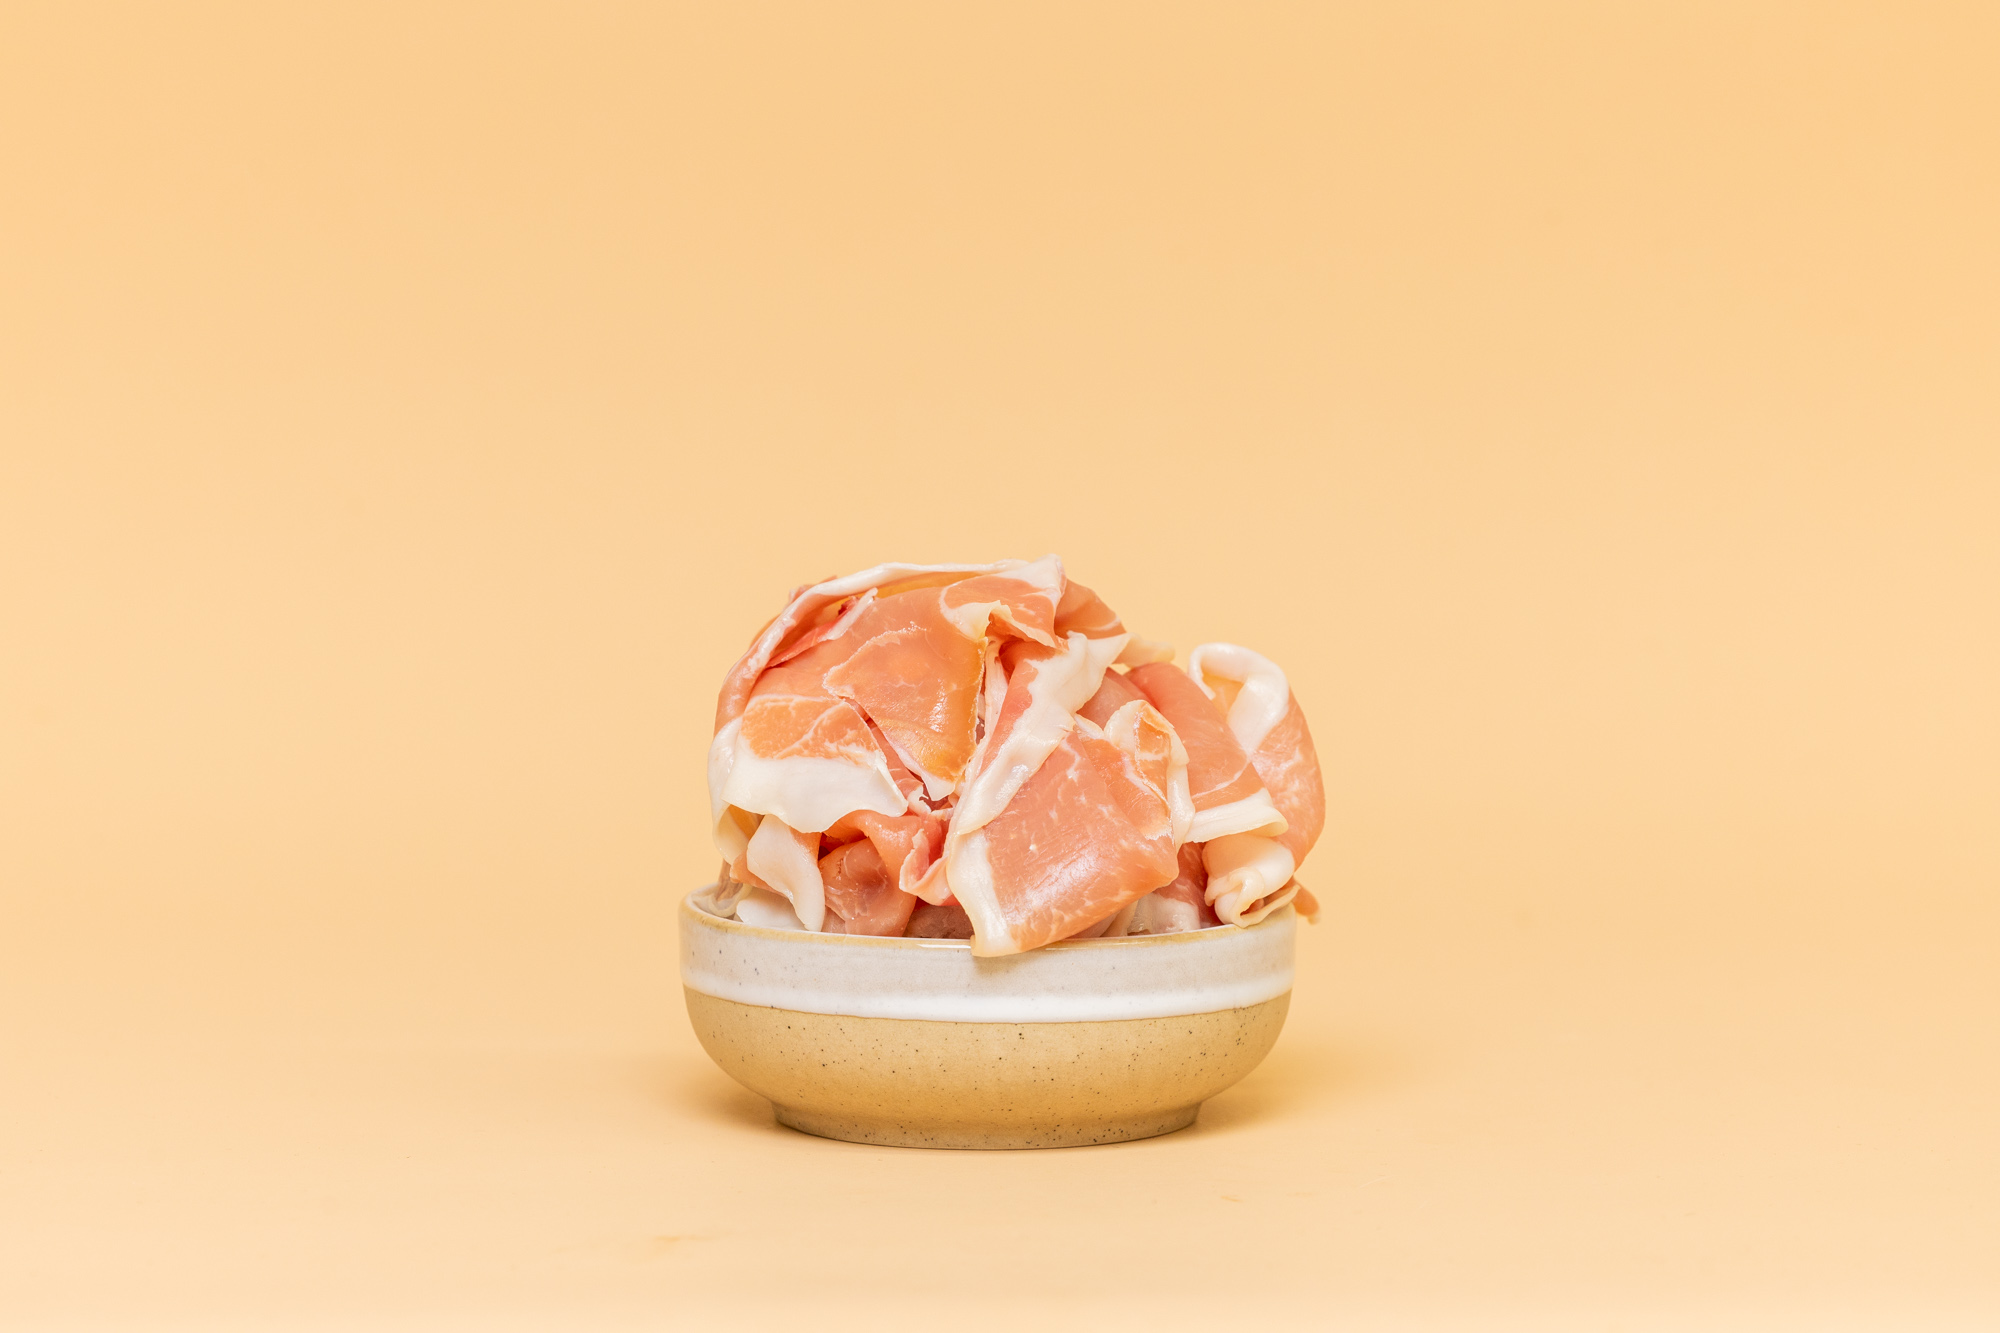 Spanish proscuitto 100g